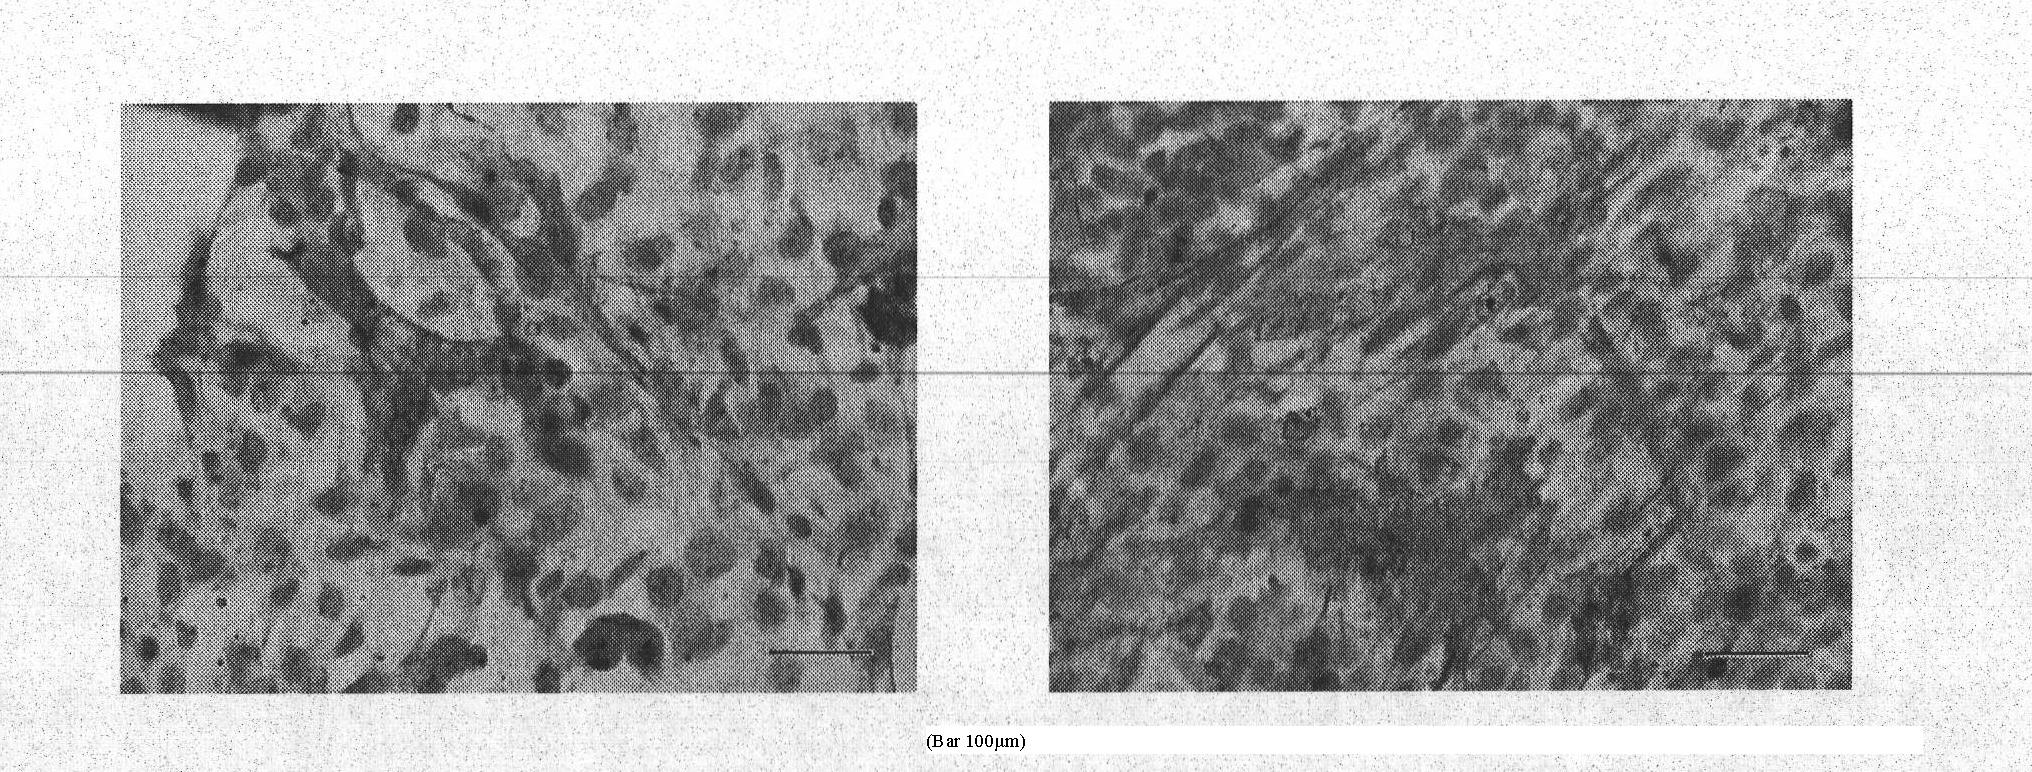 Method for inducing in vitro directed differentiation of stem cells through non-contact coculture